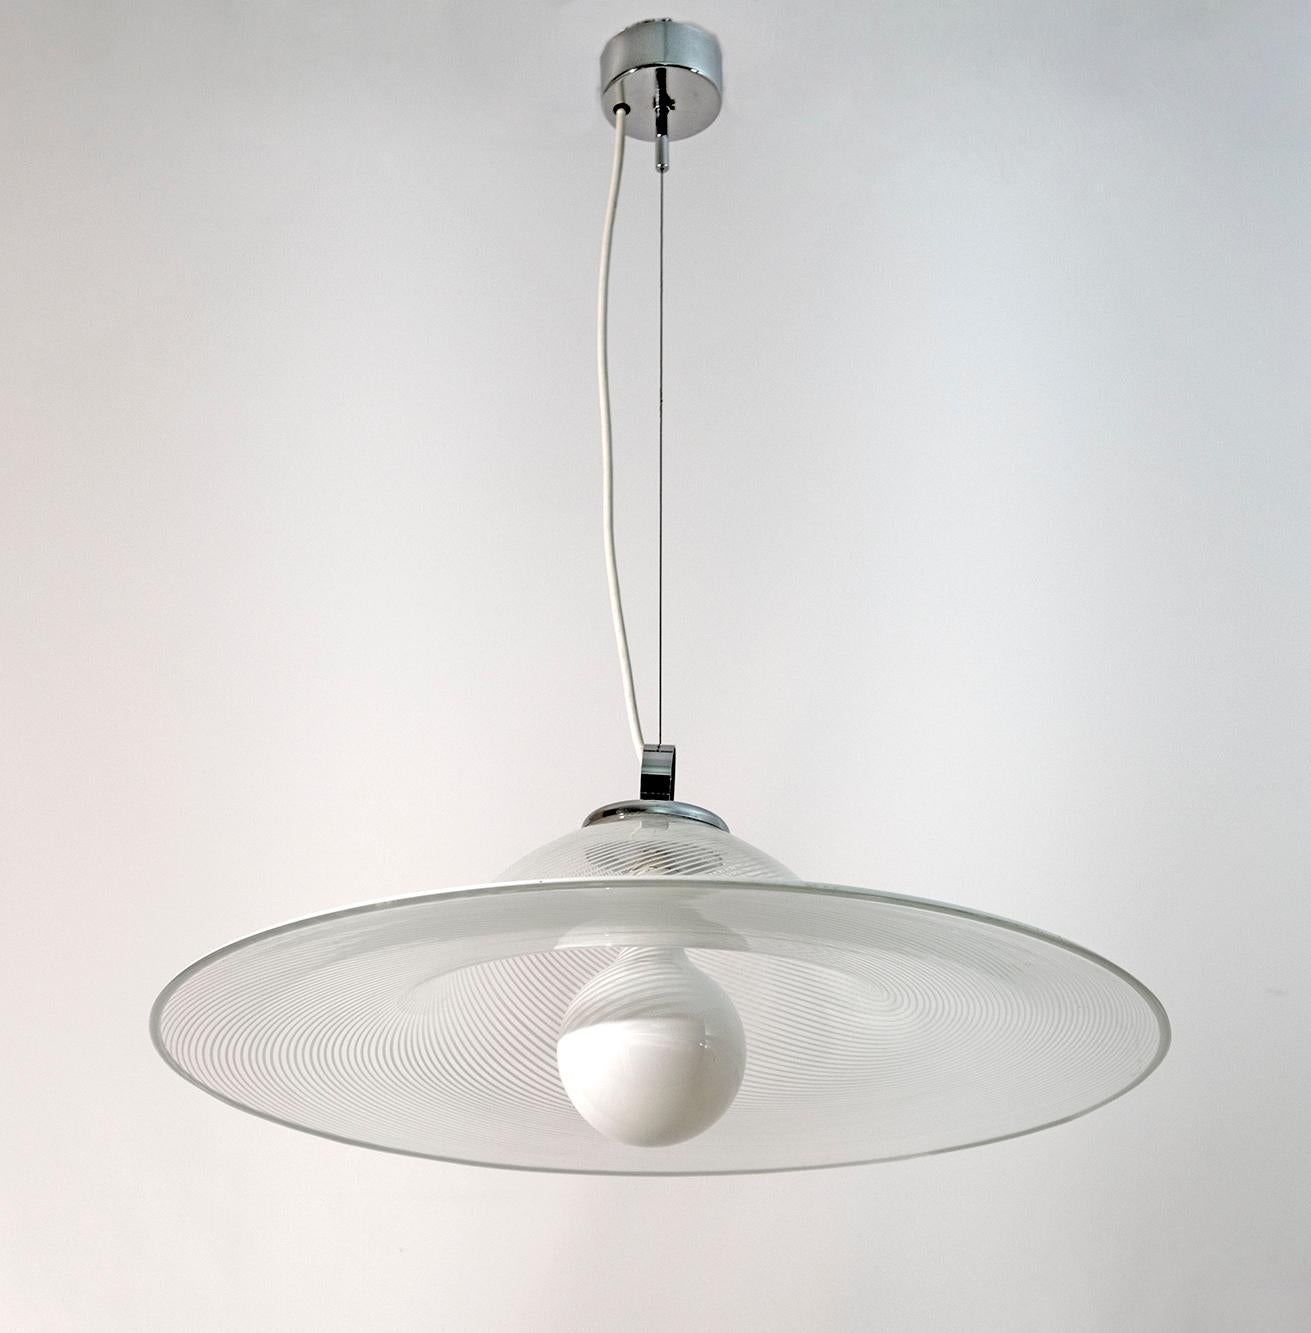 Superb pendant lamp in Murano glass, produced by the Masters of Murano, blown glass processing technique, spiral shape.